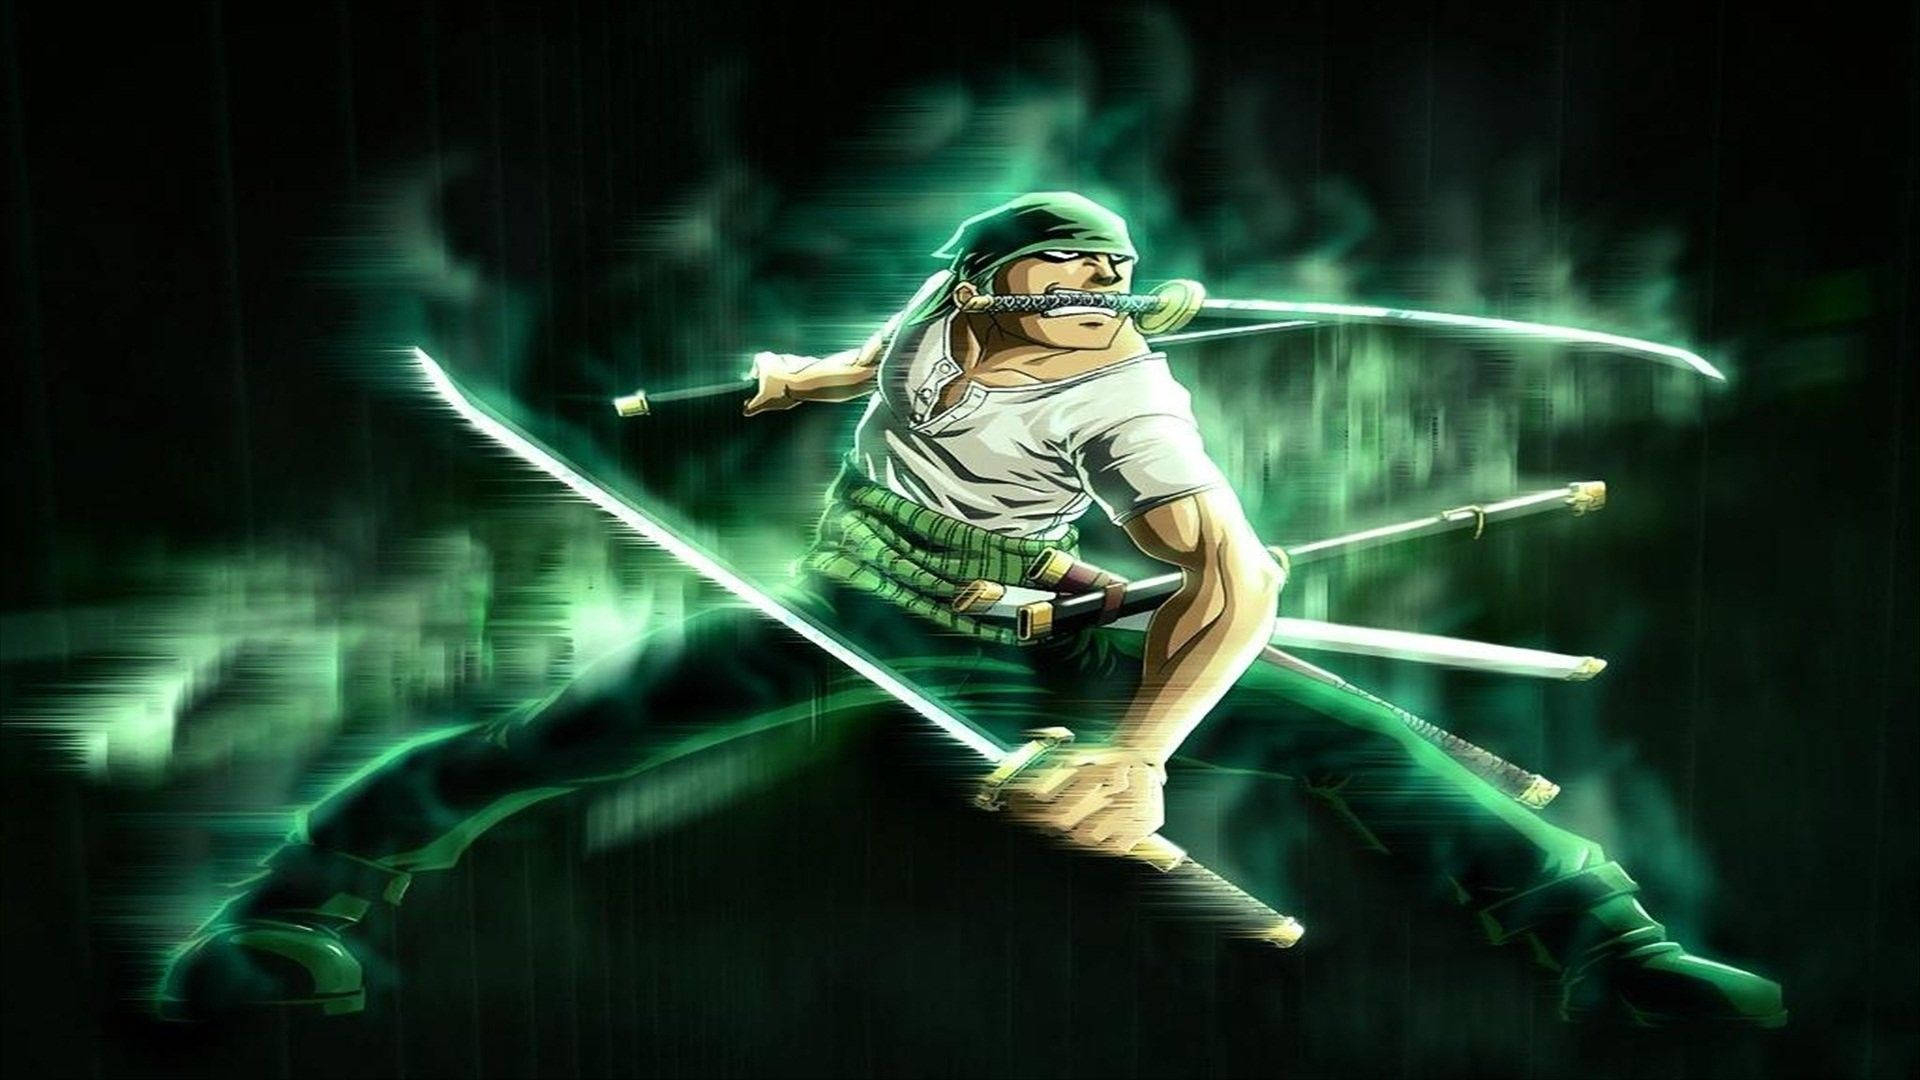 1920x1080 Download One Piece Zoro With Green Aura Wallpaper